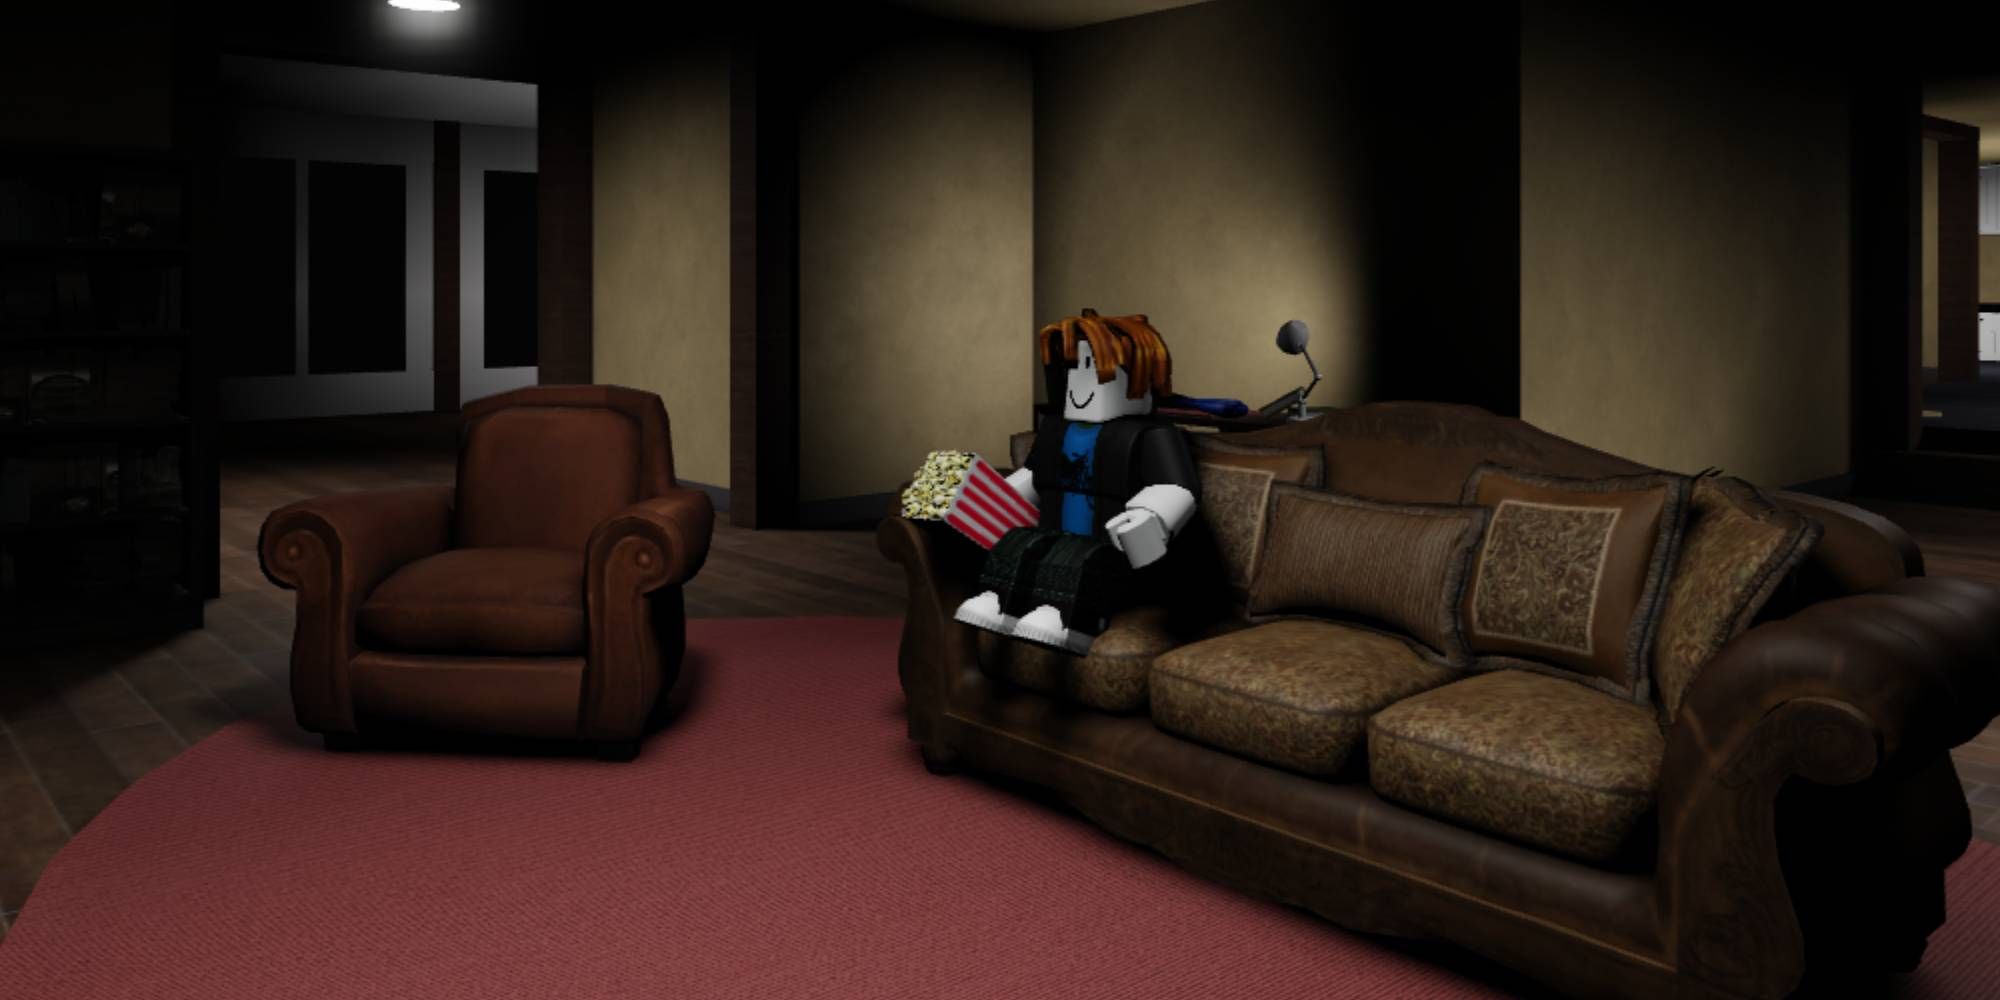 Radiant Residents character sitting on the sofa and eating popcorn